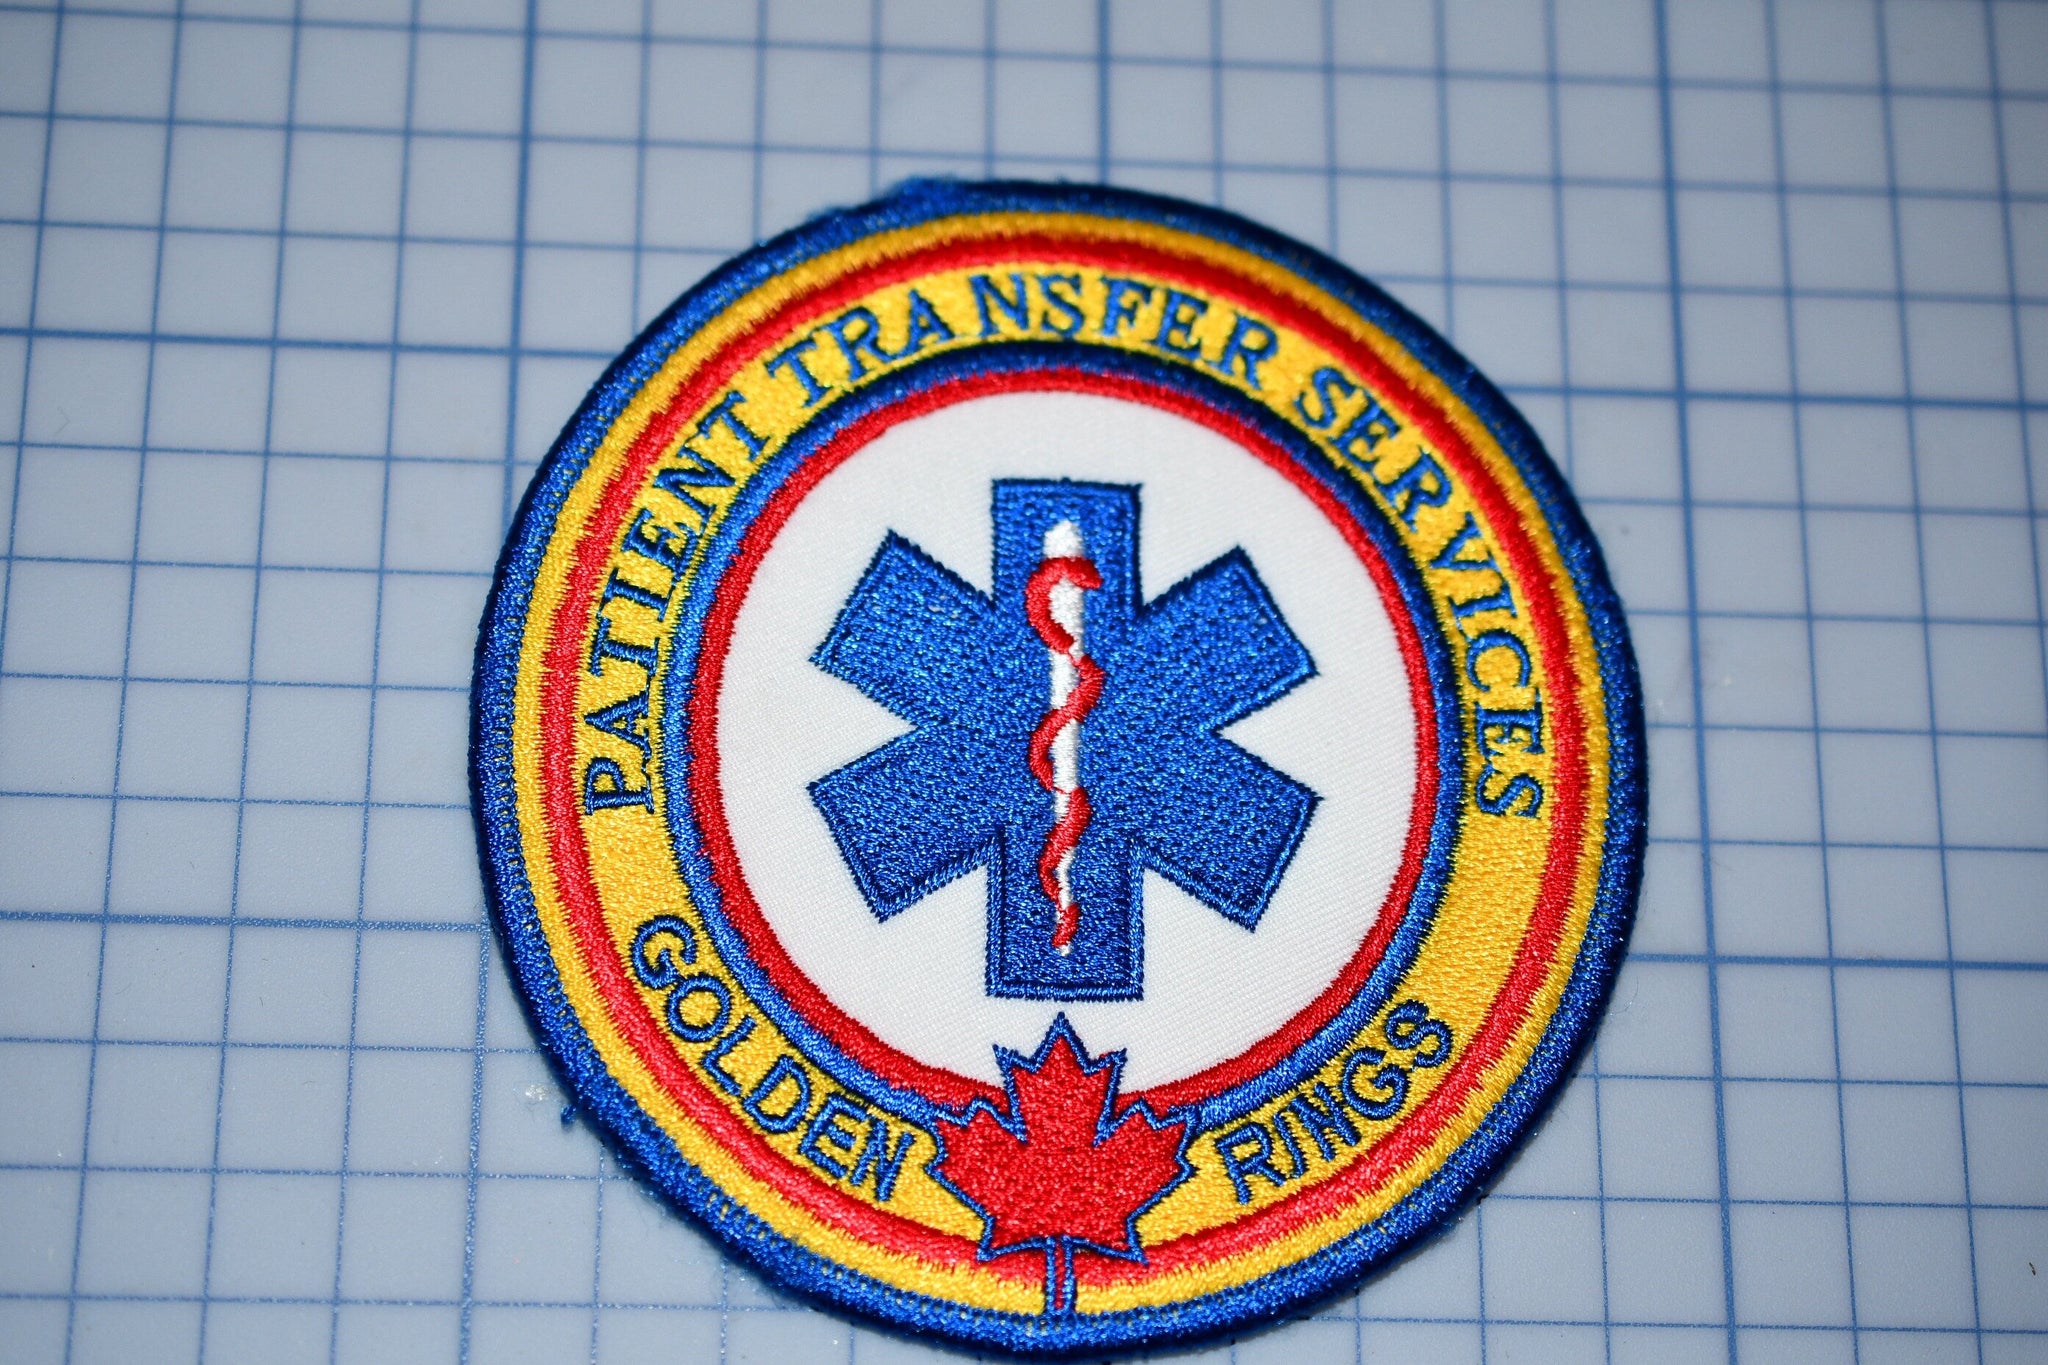 Golden Rings Canada Patient Transfer Services Patch (B26-303)